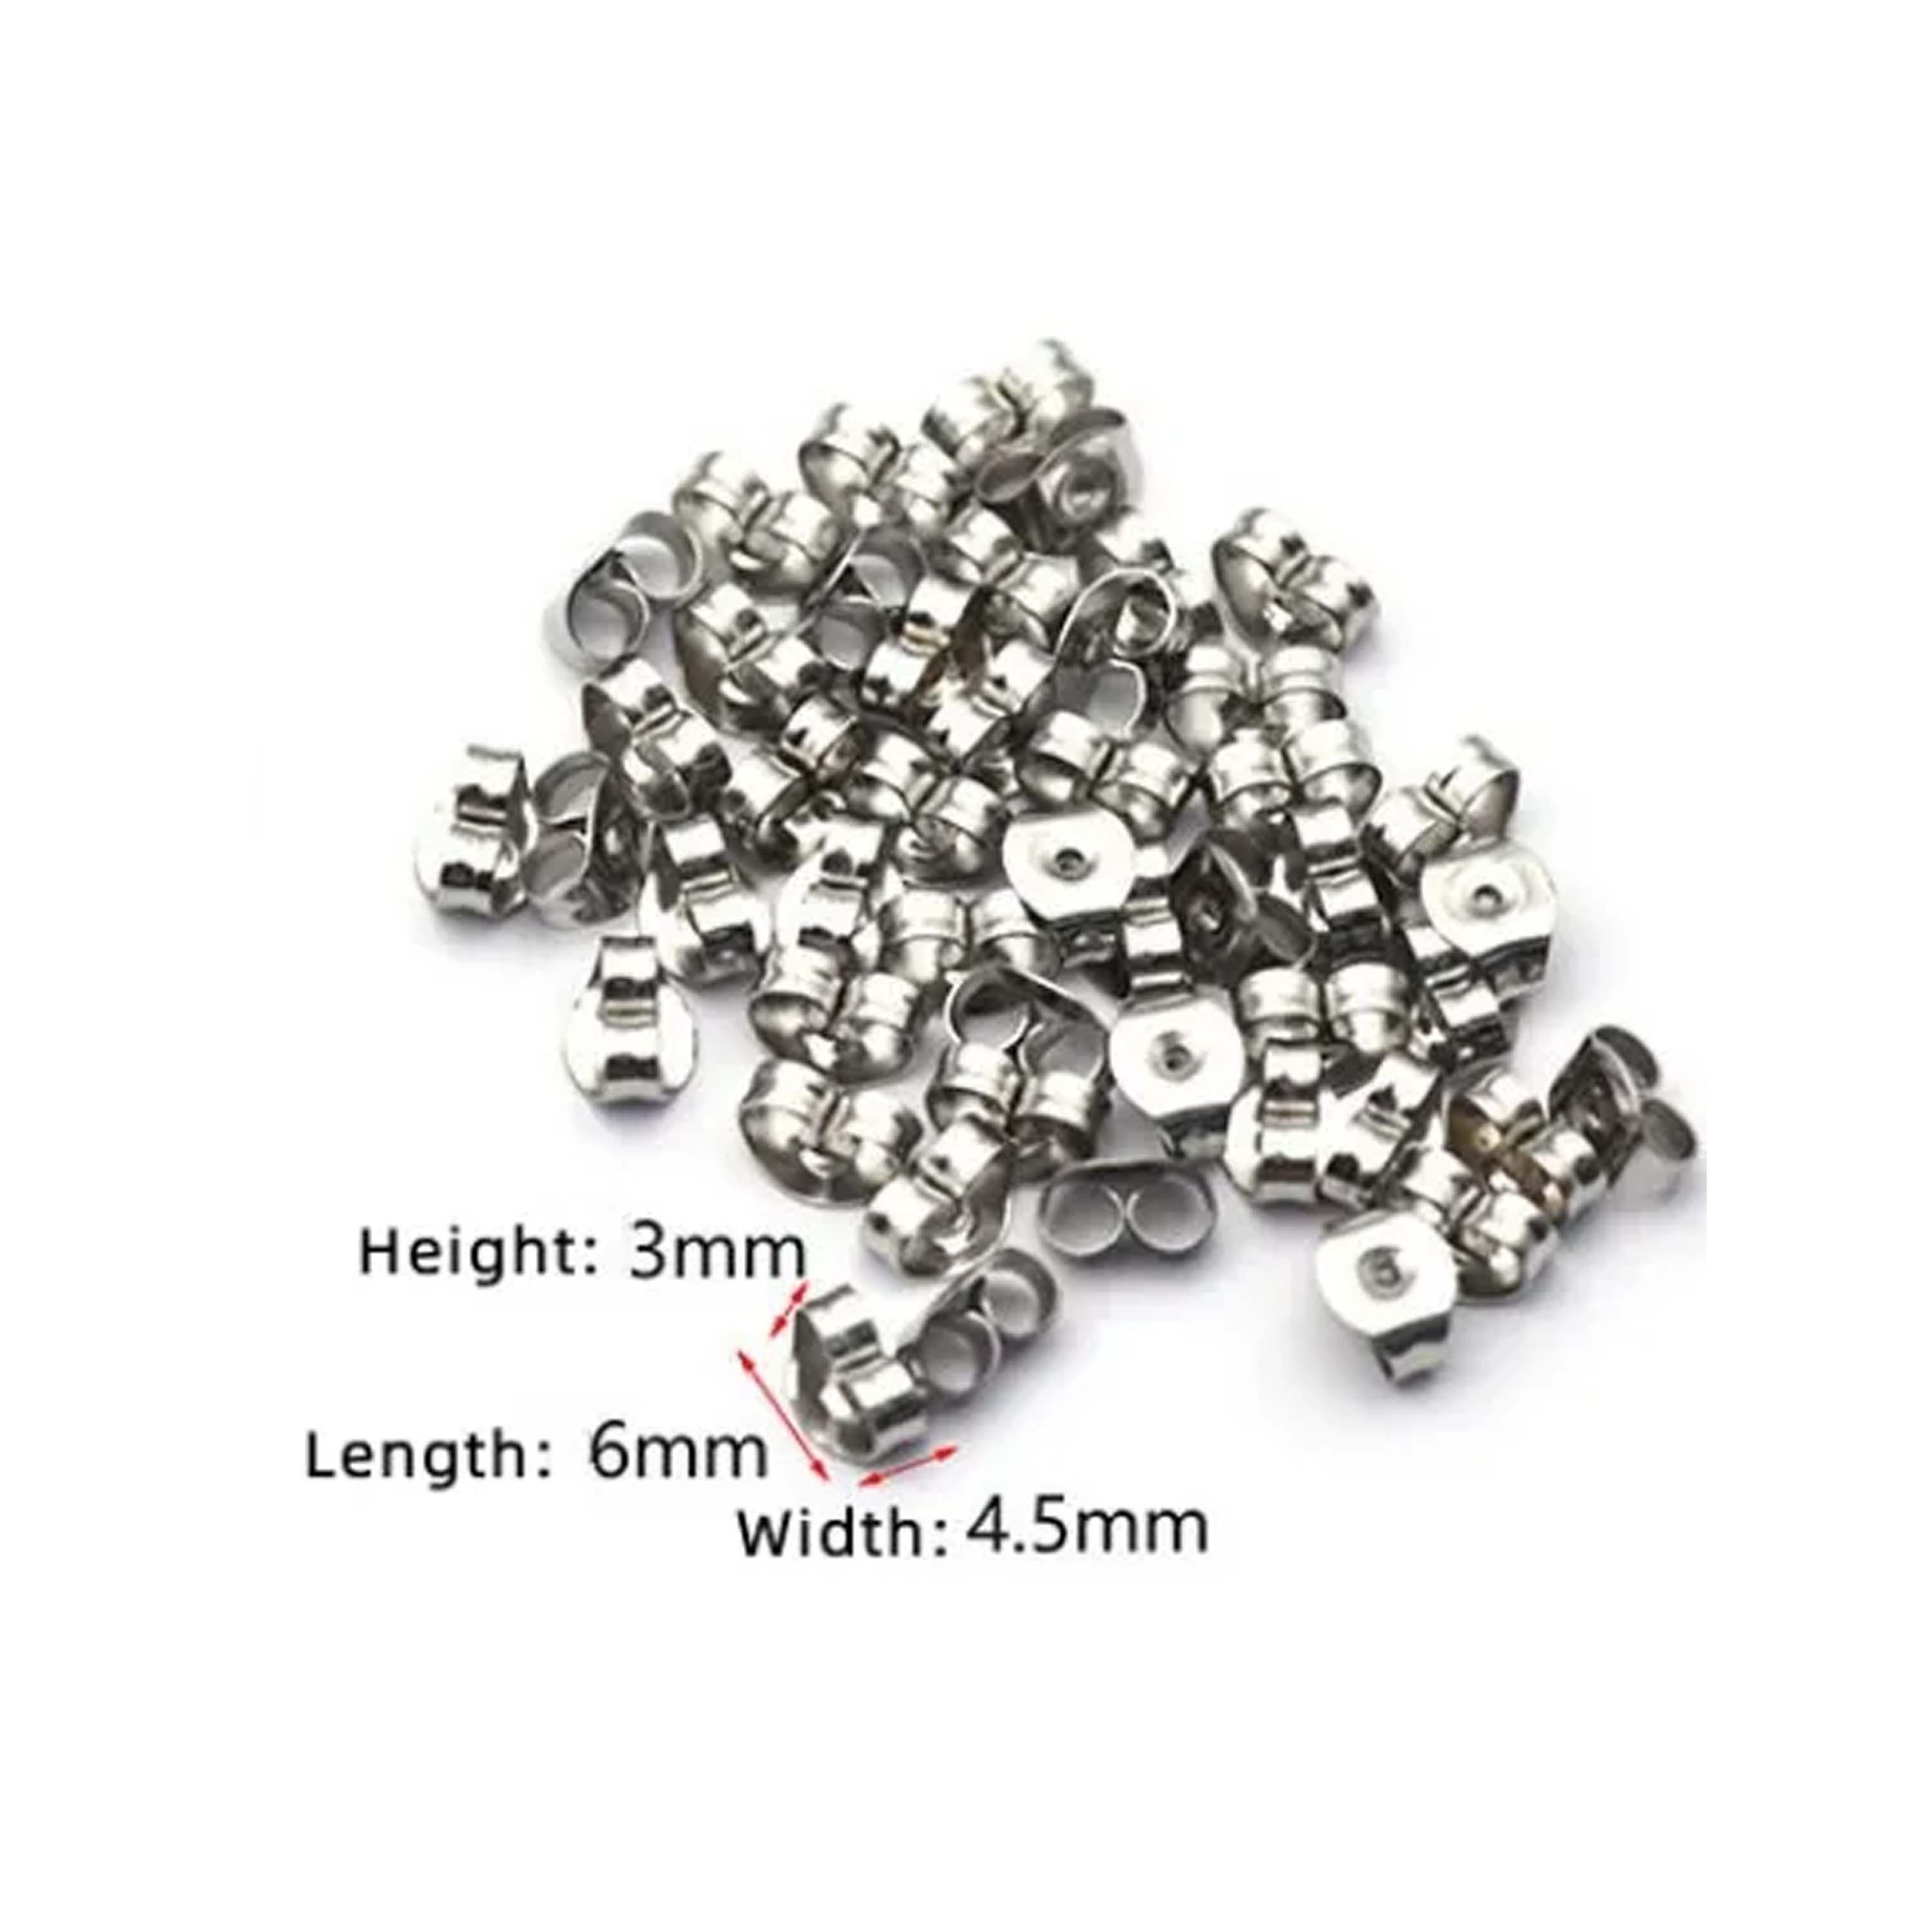 100 Pieces Stainless Steel Earrings Posts Flat Pad,100 Pieces Butterfly  Earring Backs,100 Pieces Bullet Earring Backs,Total 300 Pieces (10mm)